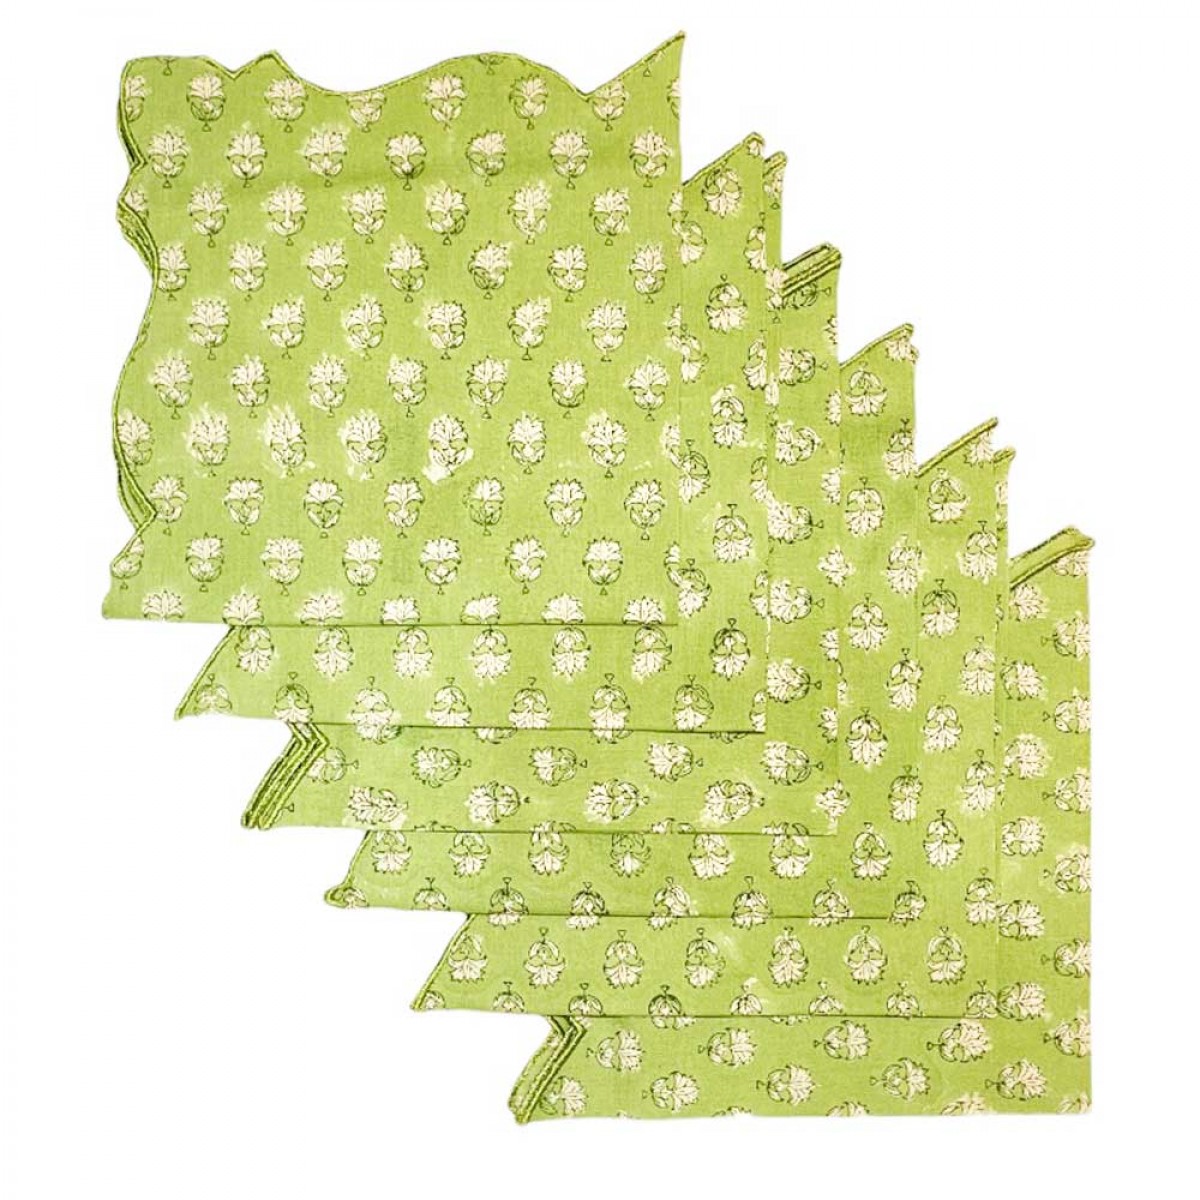 Cotton Scallop Embroidered Printed Napkin - Lime Green (Set of 6)